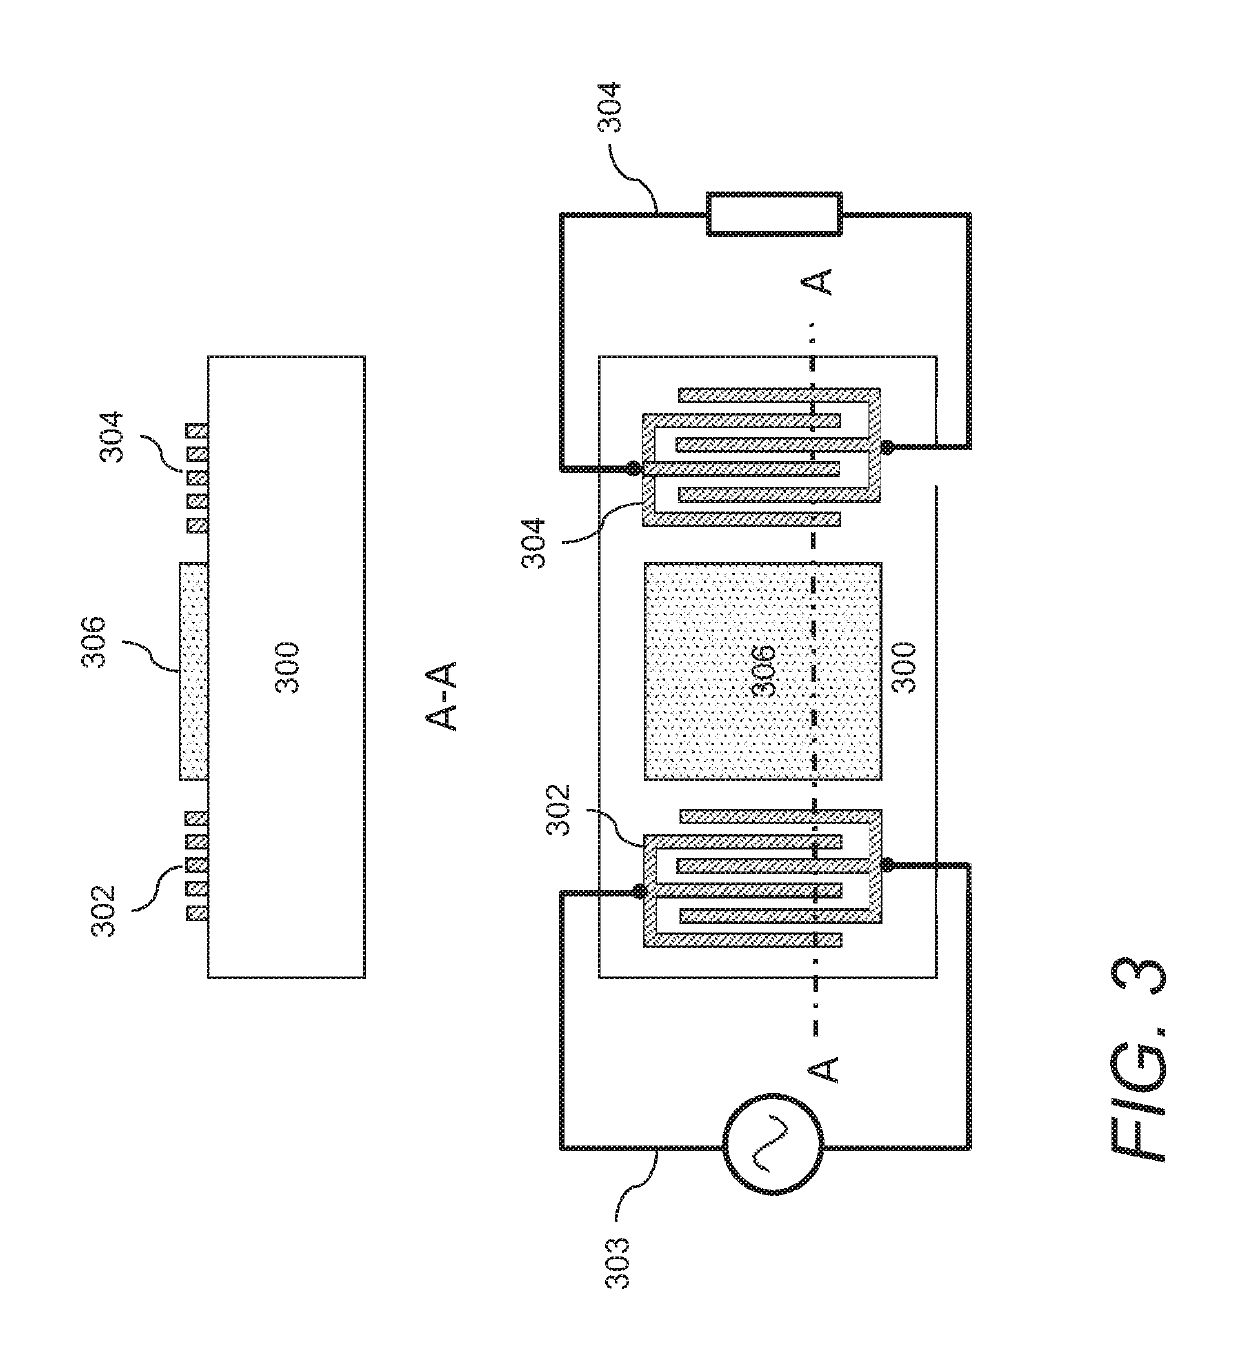 Acoustic wave sensors and methods of sensing a gas-phase analyte